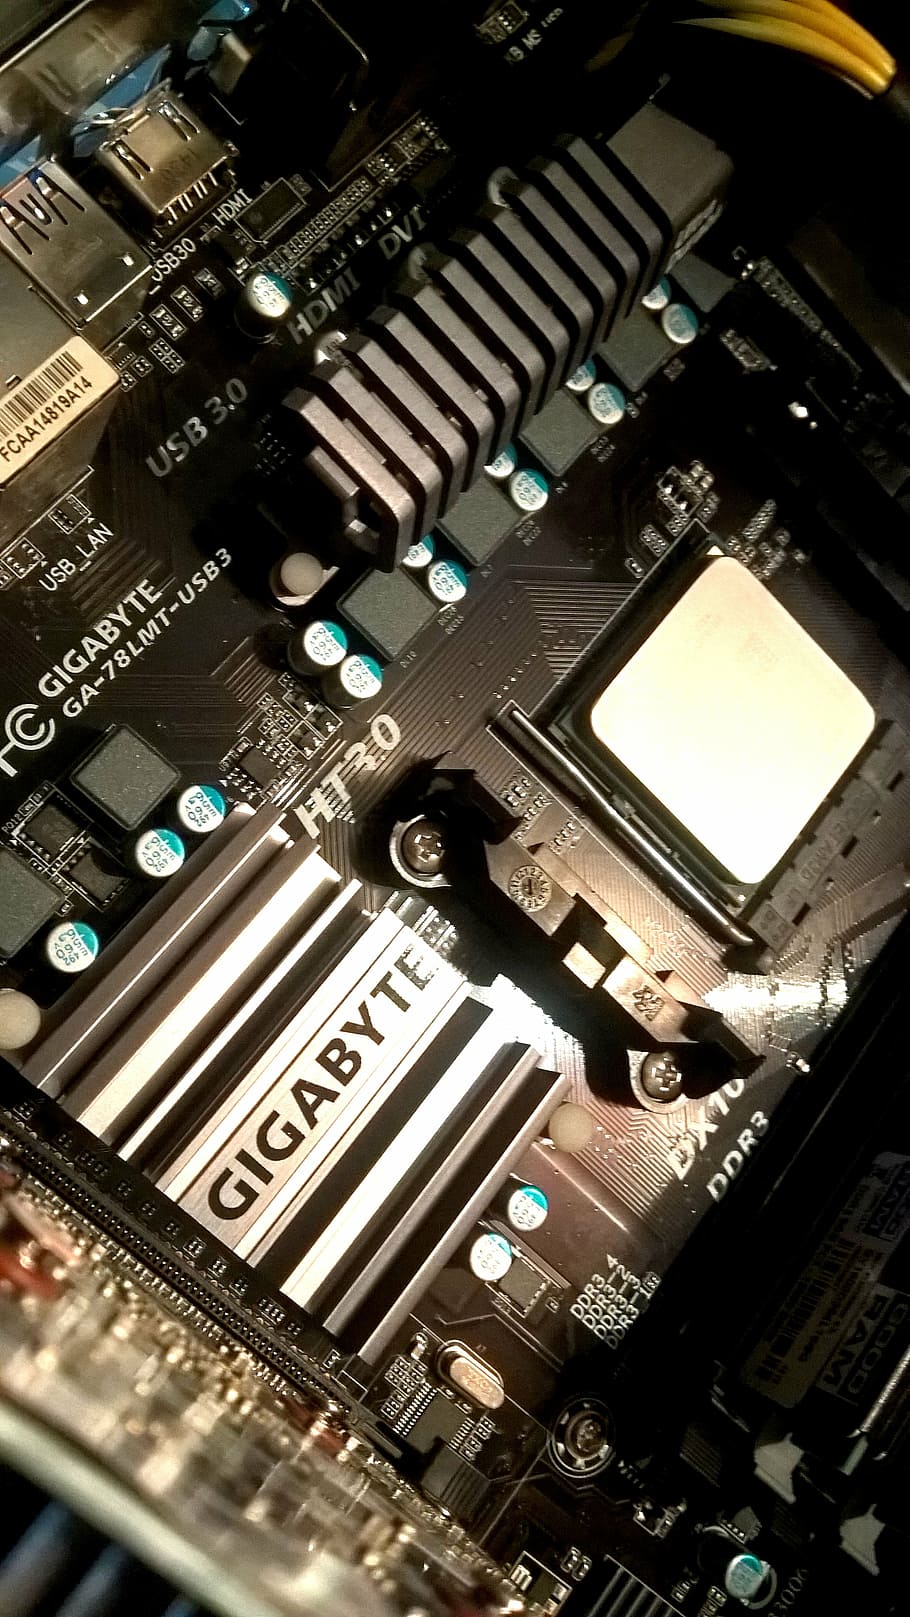 processor, pc, motherboard, computers, amd, chipset, technology, control, communication, connection